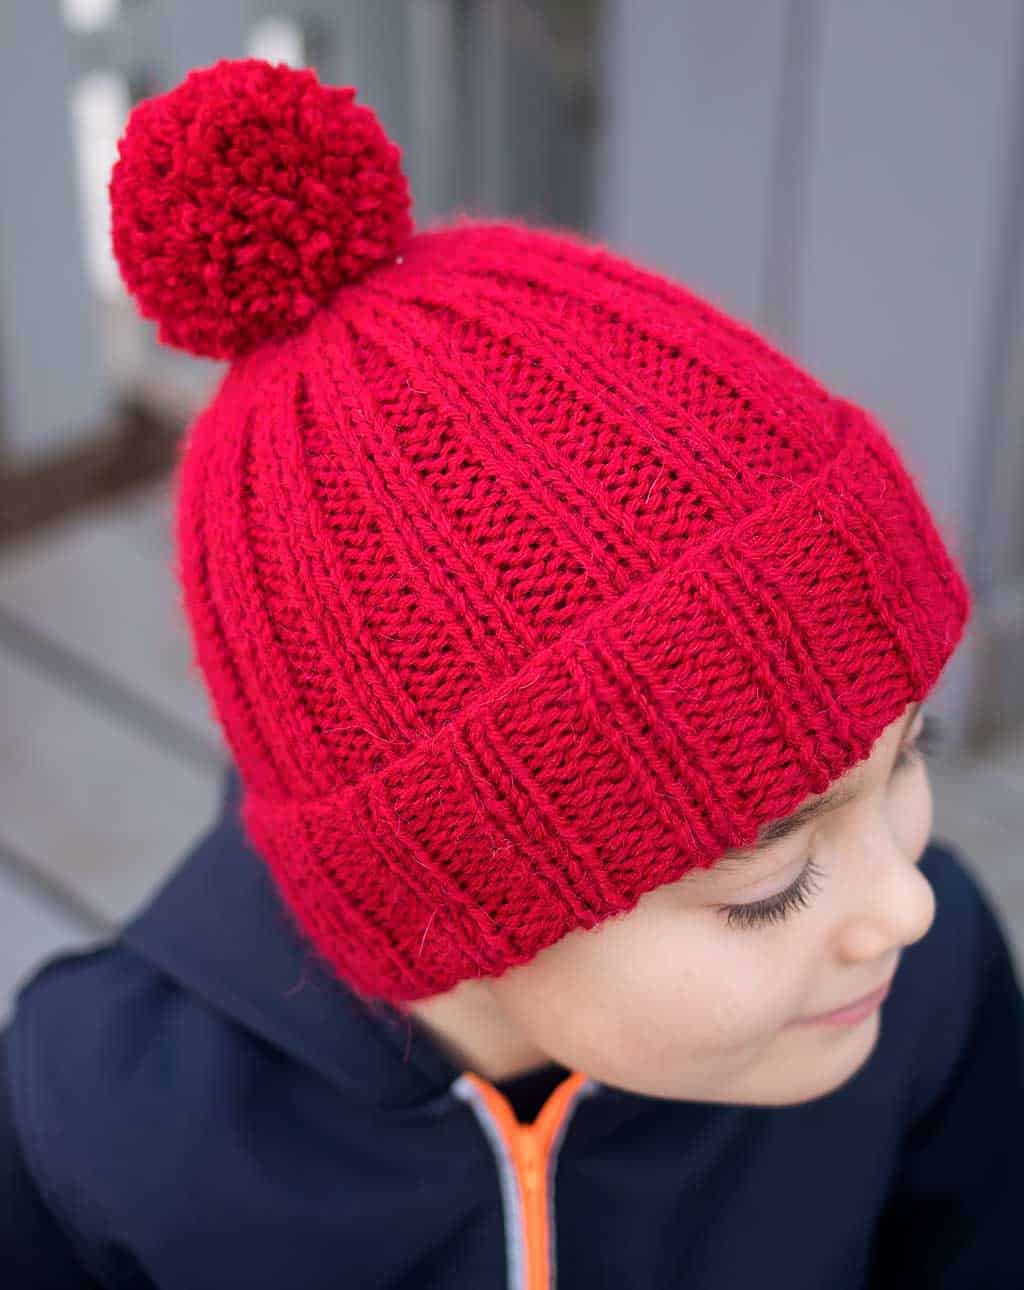 How to Knit a Hat on Straight Needles